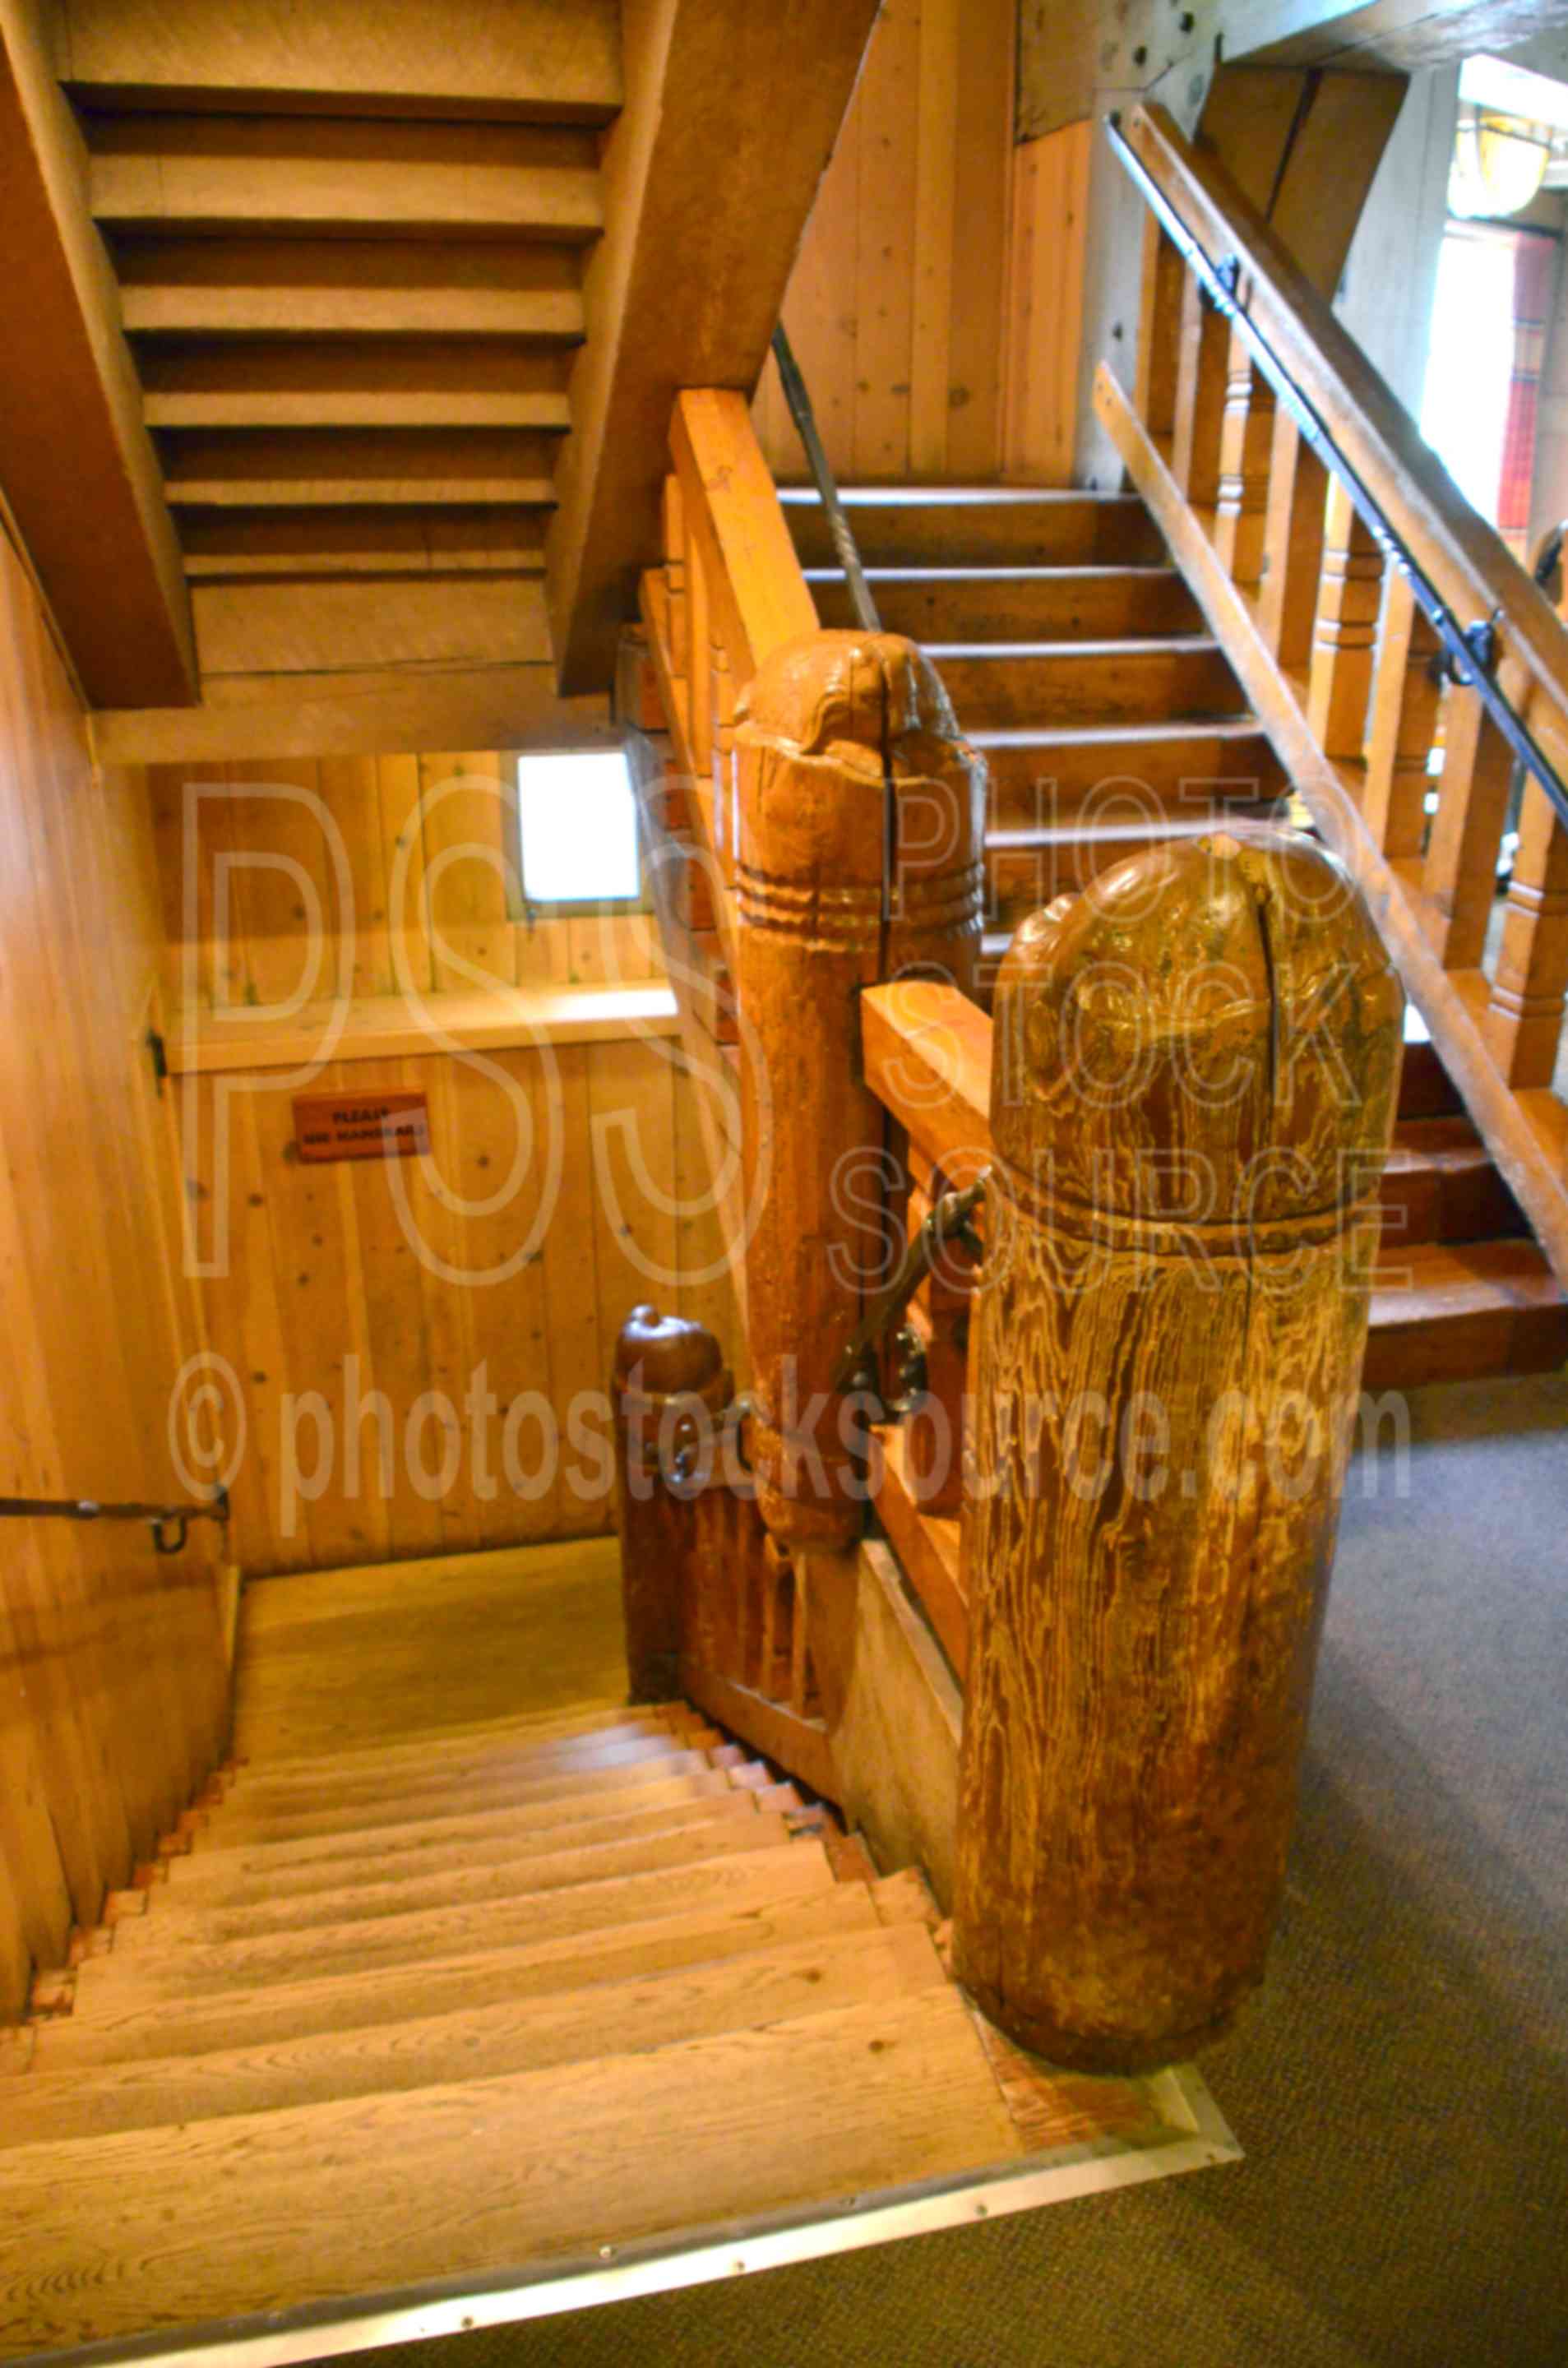 Carved Newel Post on Staircase,mt. hood,lodge,building,historic,historical,carved,newel,post,art,sculpture